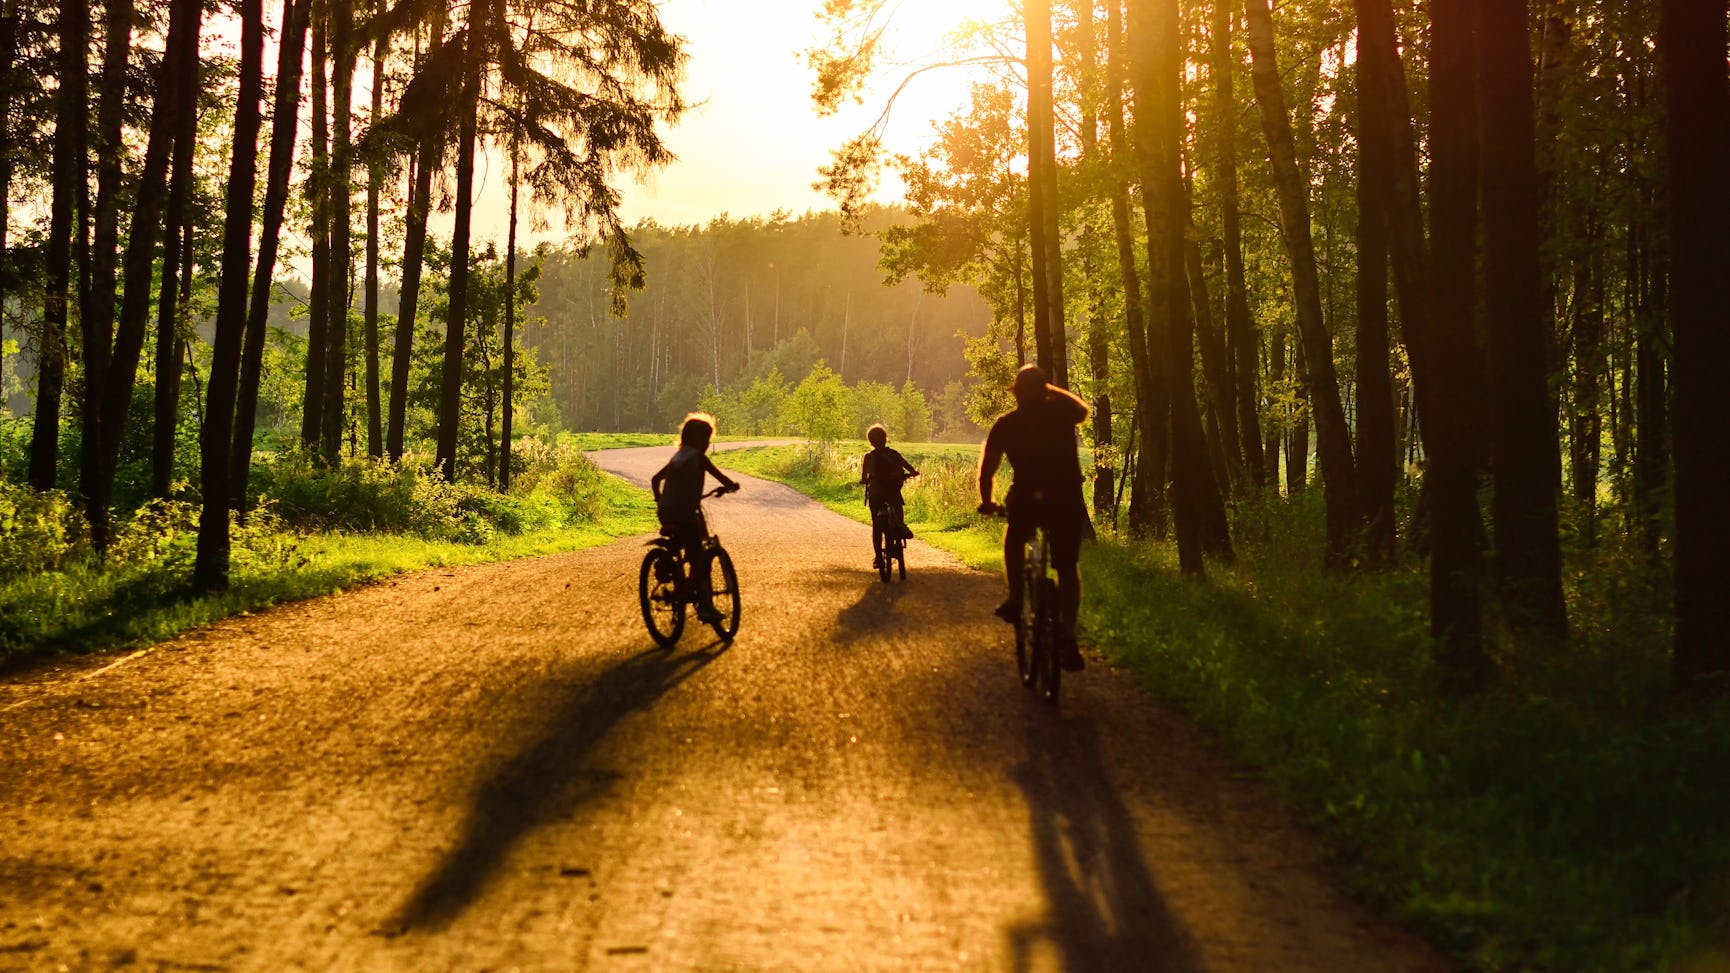 Two children and an adult riding bikes through the Forrest 